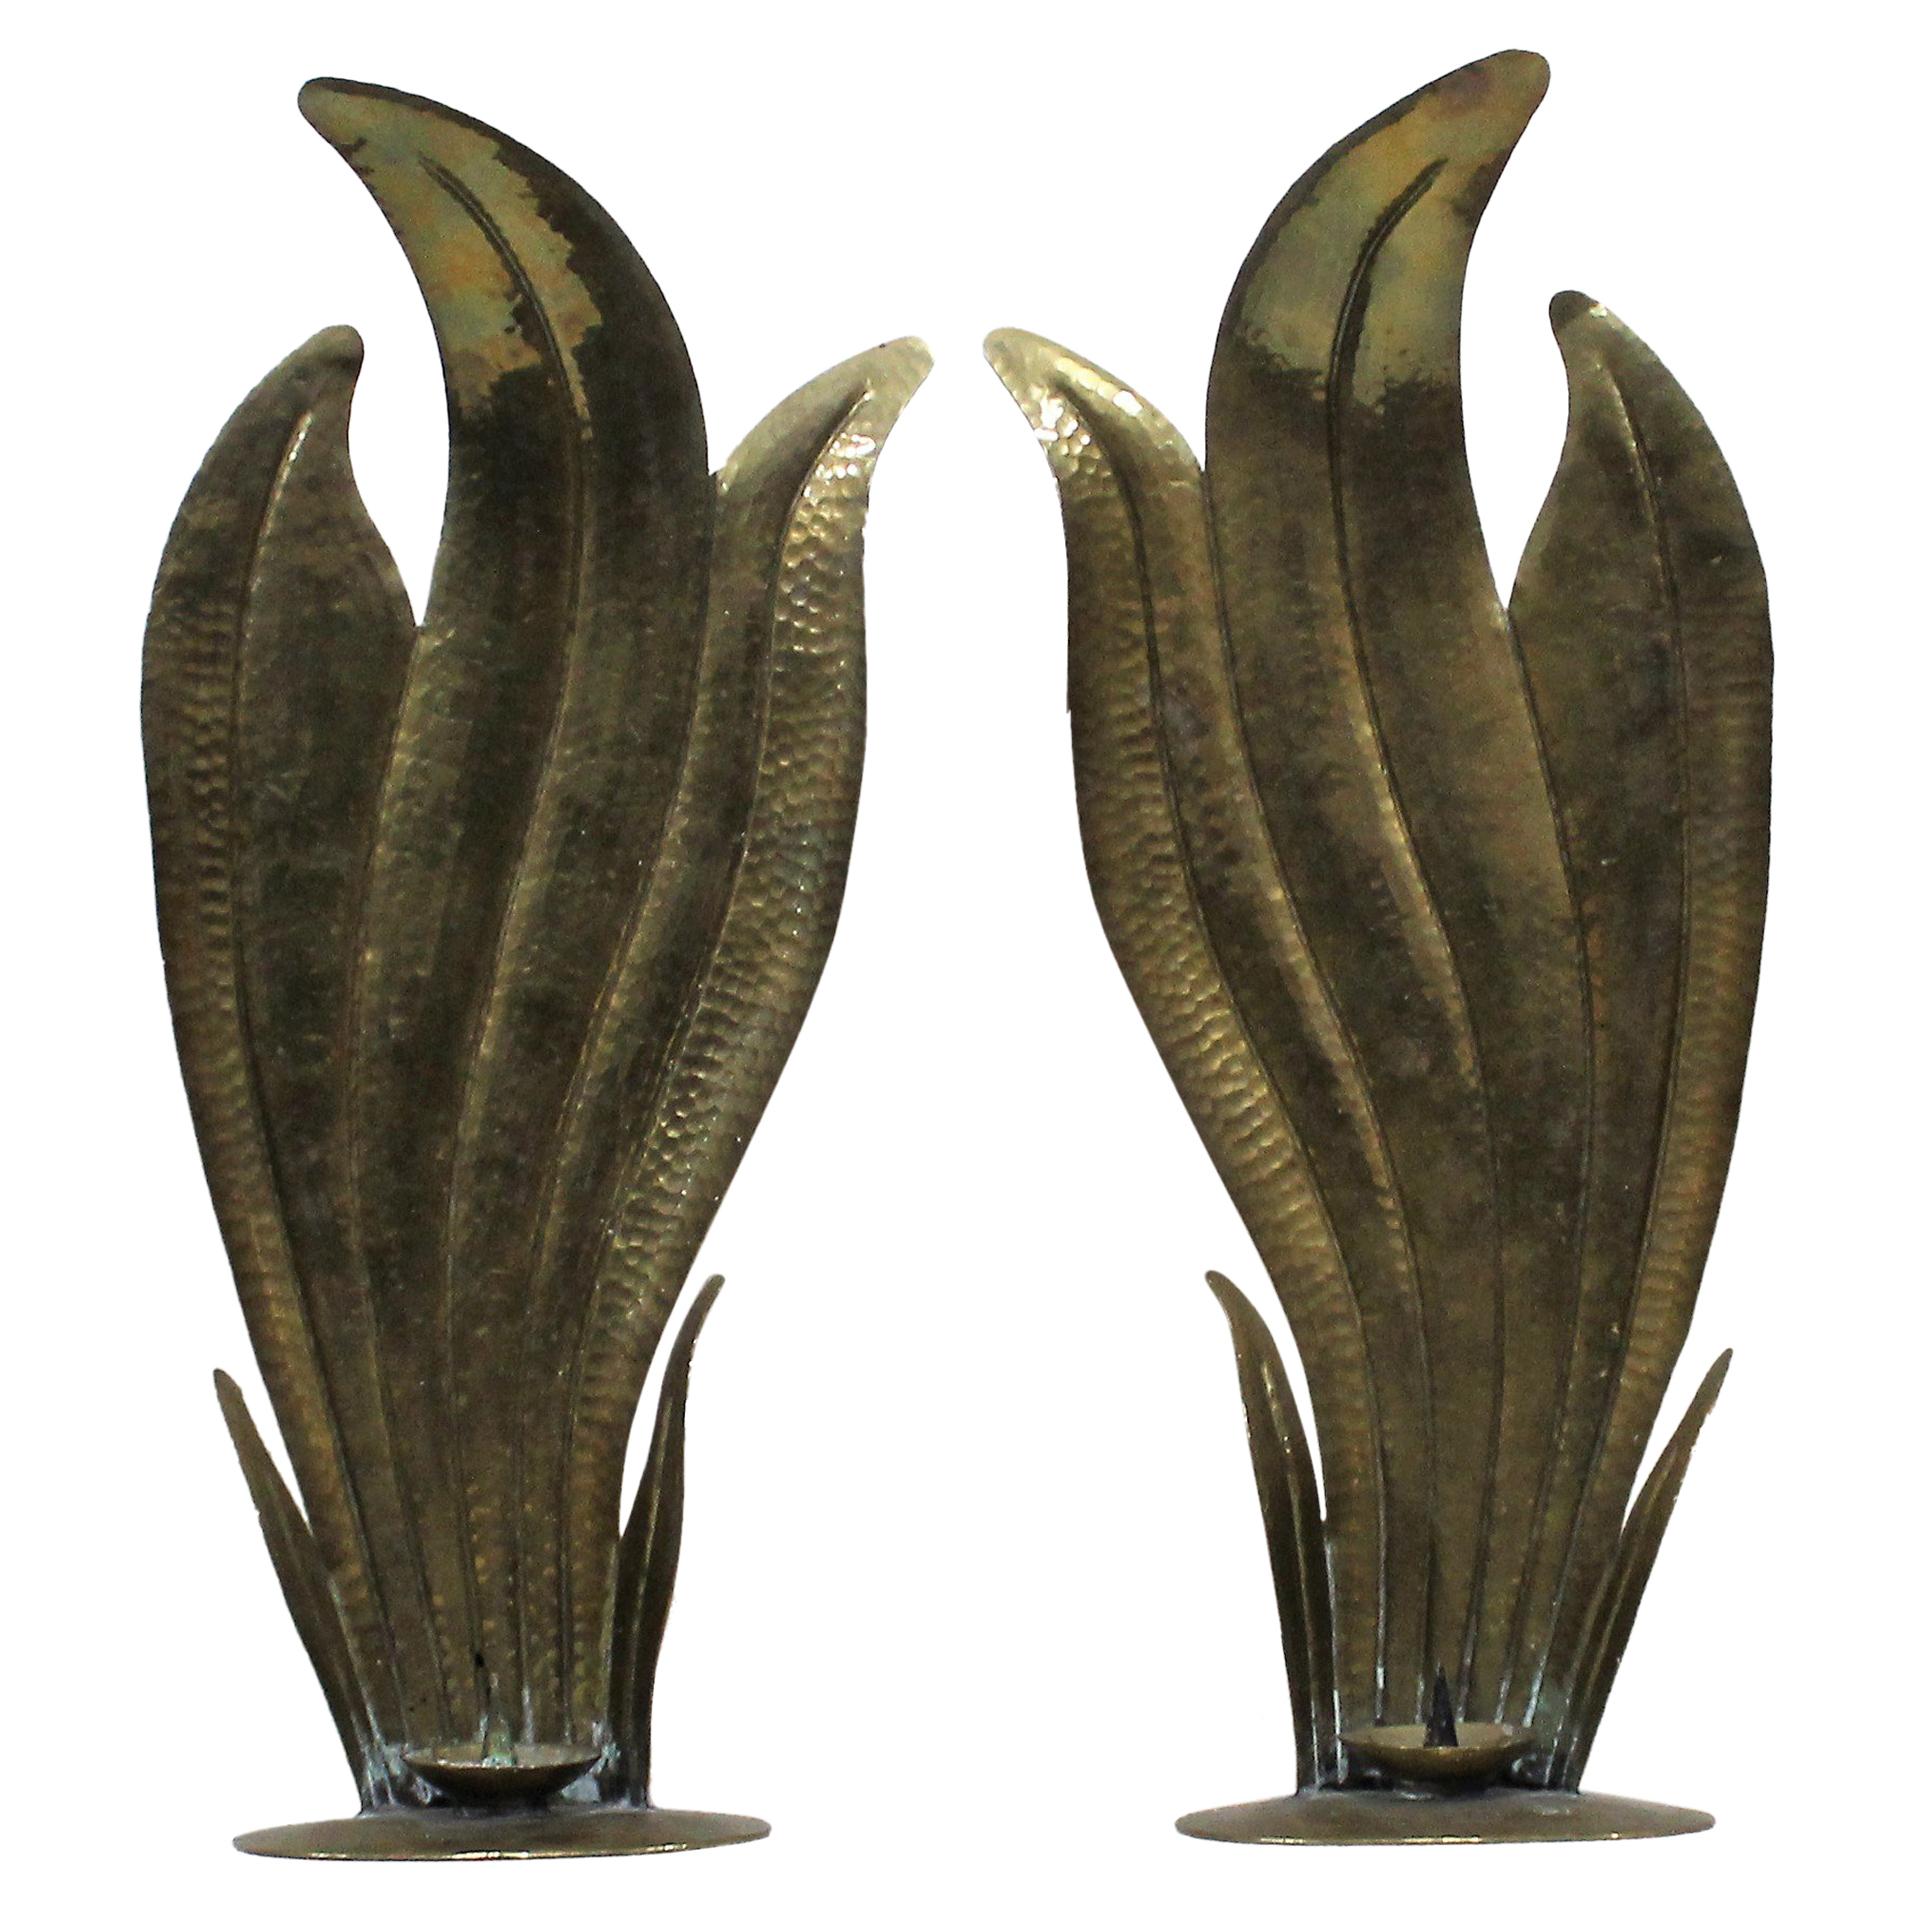 Pair of Egidio Casagrande Italian Hand-Hammered Brass Candle Wall/Table Sconce's